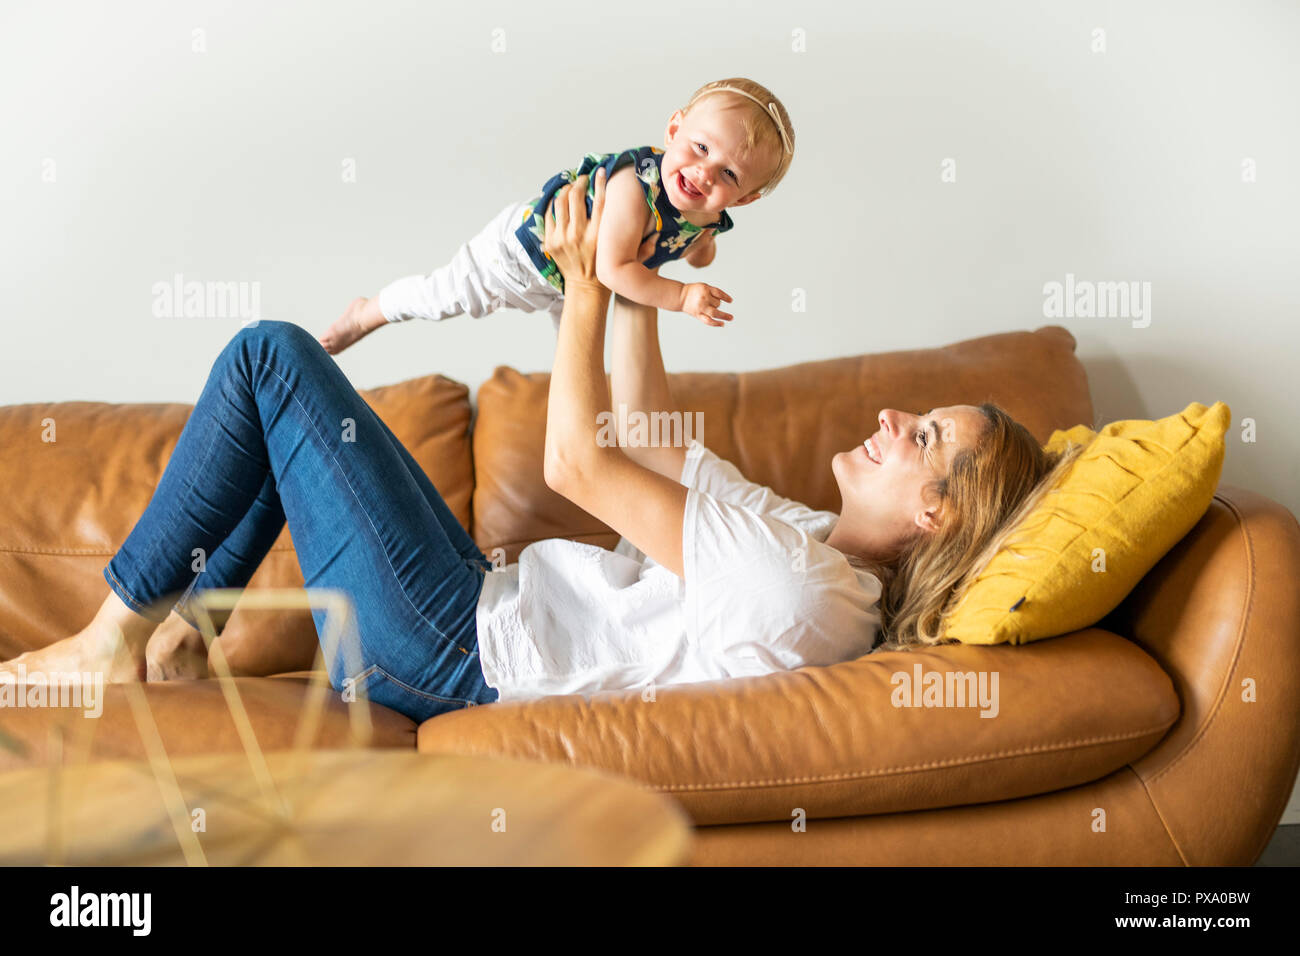 A happy family. Mother and baby daughter plays, on the sofa Stock Photo